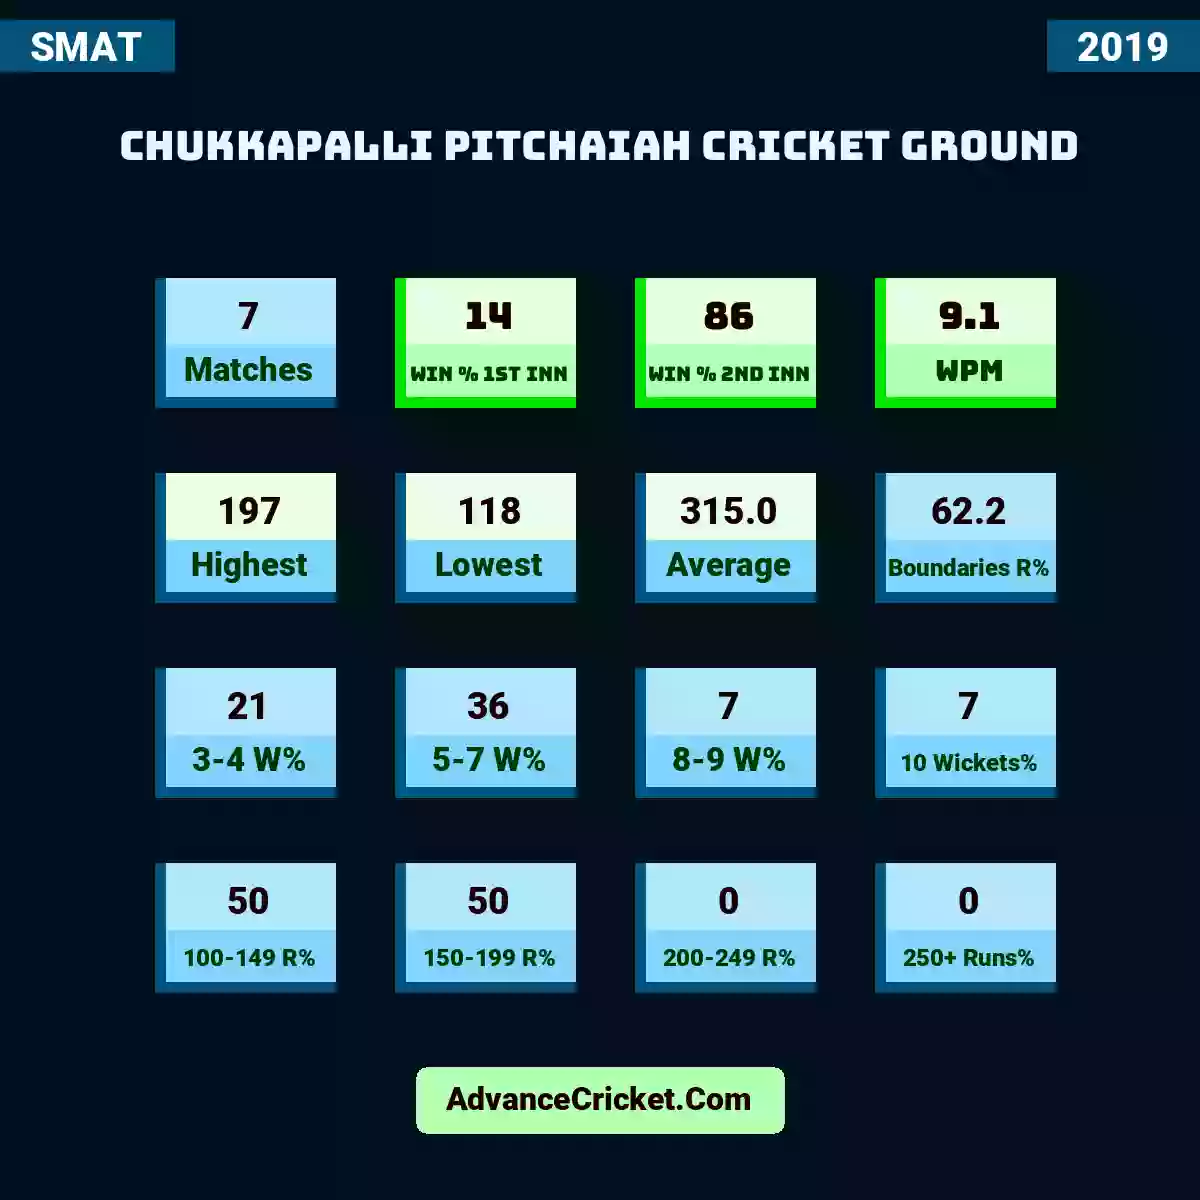 Image showing Chukkapalli Pitchaiah Cricket Ground with Matches: 7, Win % 1st Inn: 14, Win % 2nd Inn: 86, WPM: 9.1, Highest: 197, Lowest: 118, Average: 315.0, Boundaries R%: 62.2, 3-4 W%: 21, 5-7 W%: 36, 8-9 W%: 7, 10 Wickets%: 7, 100-149 R%: 50, 150-199 R%: 50, 200-249 R%: 0, 250+ Runs%: 0.